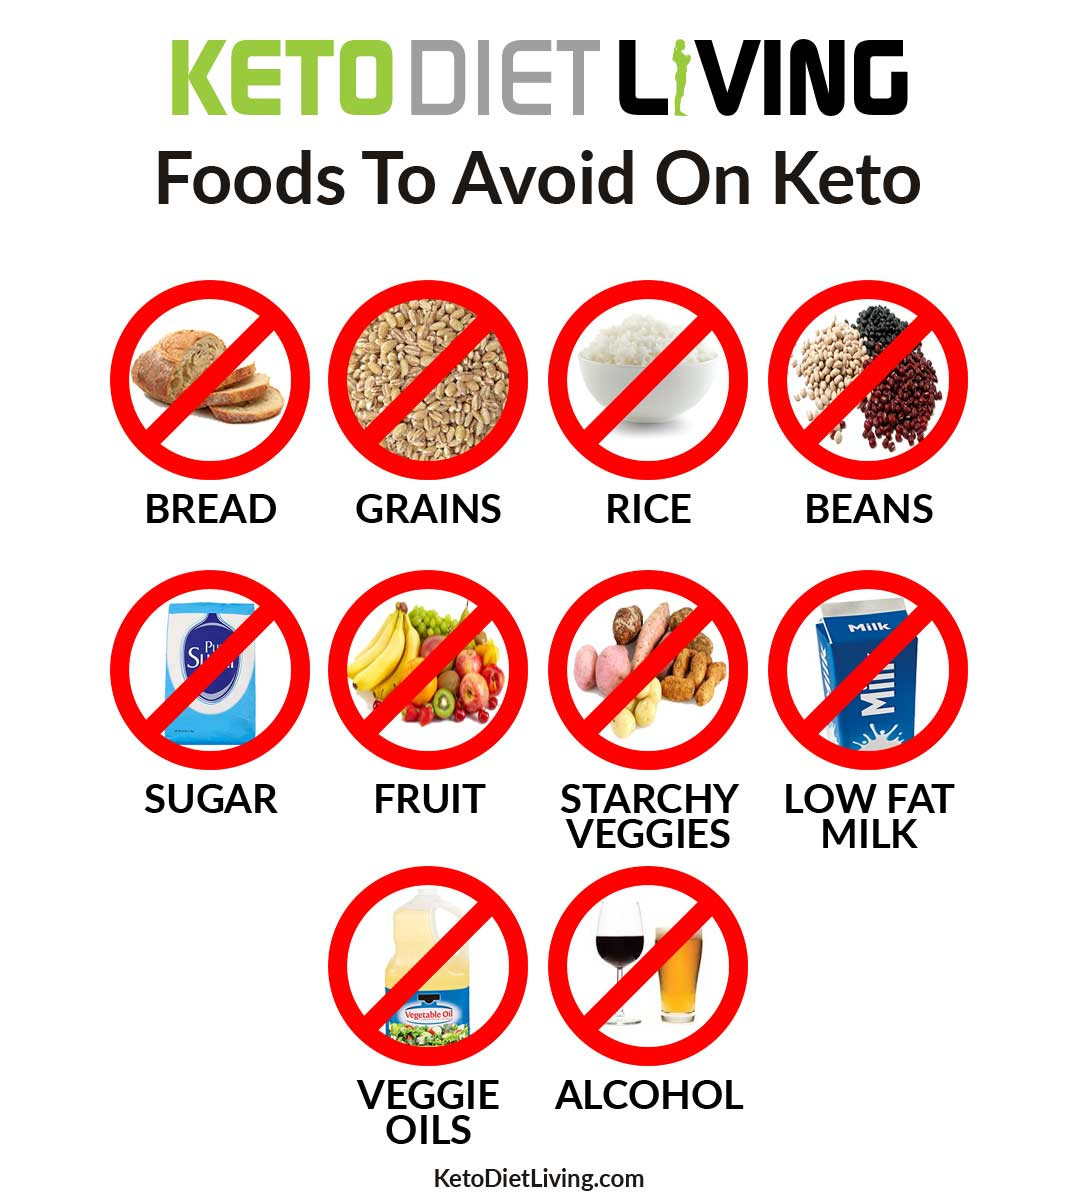 Can You Eat Beans On A Keto Diet
 How Many Carbs Should You Eat Each Day to Get Into Ketosis